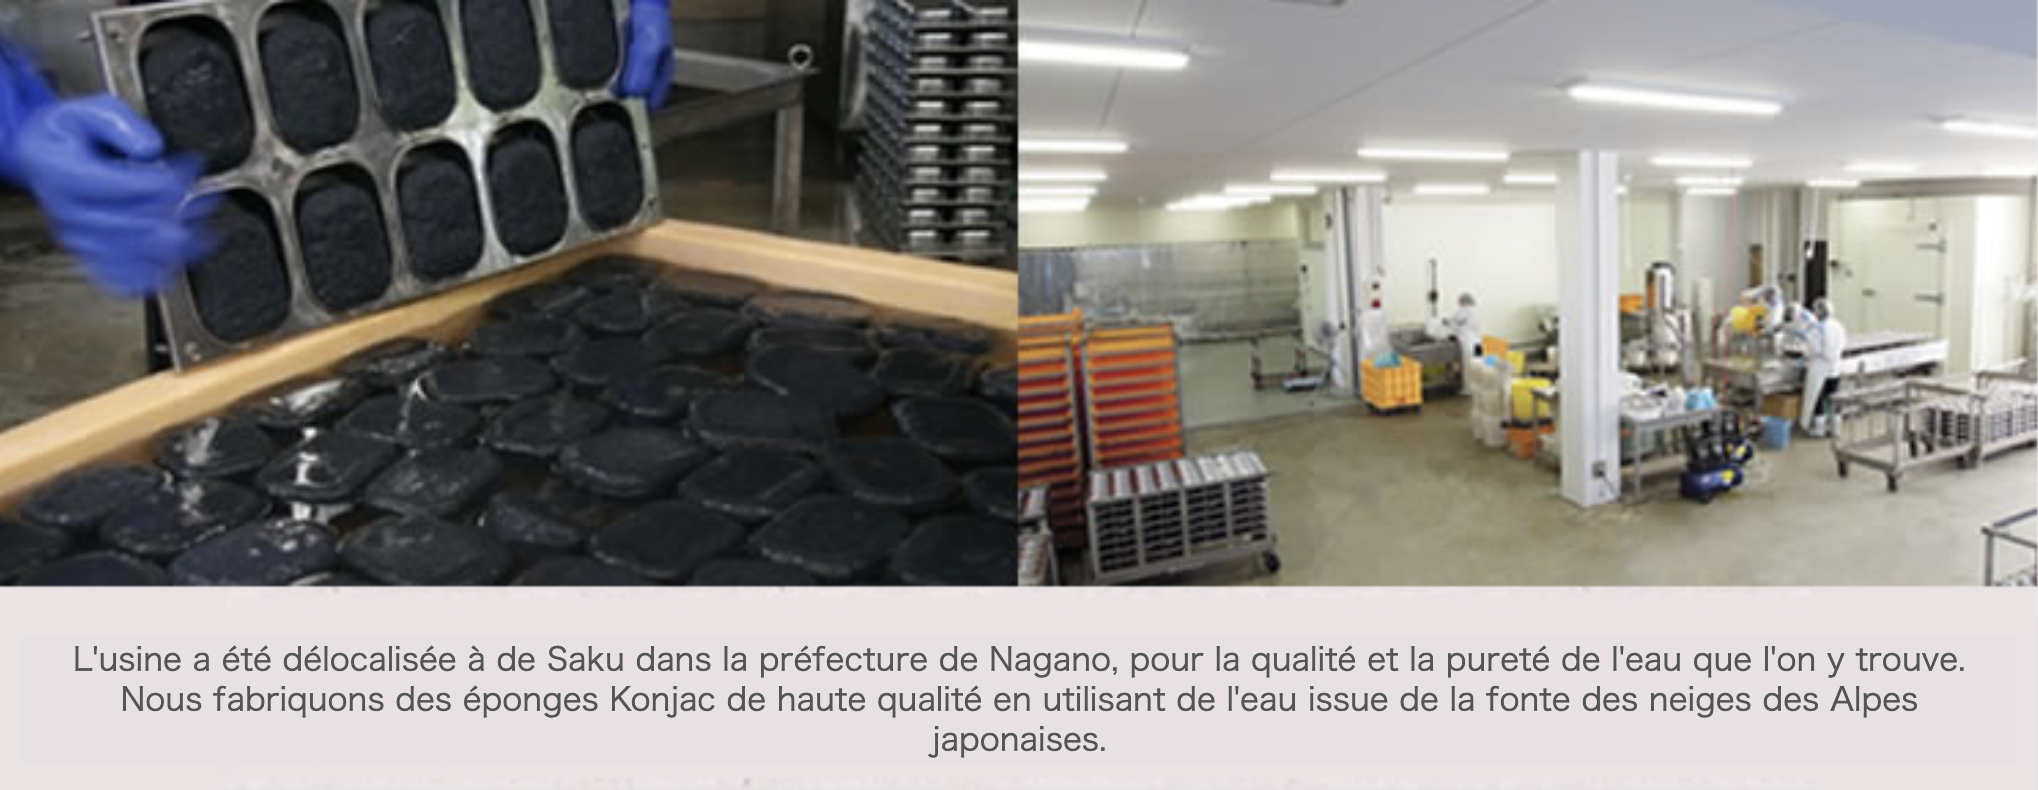 We moved our factory to Nagano prefecture in search of better quality water. We continue to make high-quality konjac sponges using the melted snow water of the Japanese Alps.